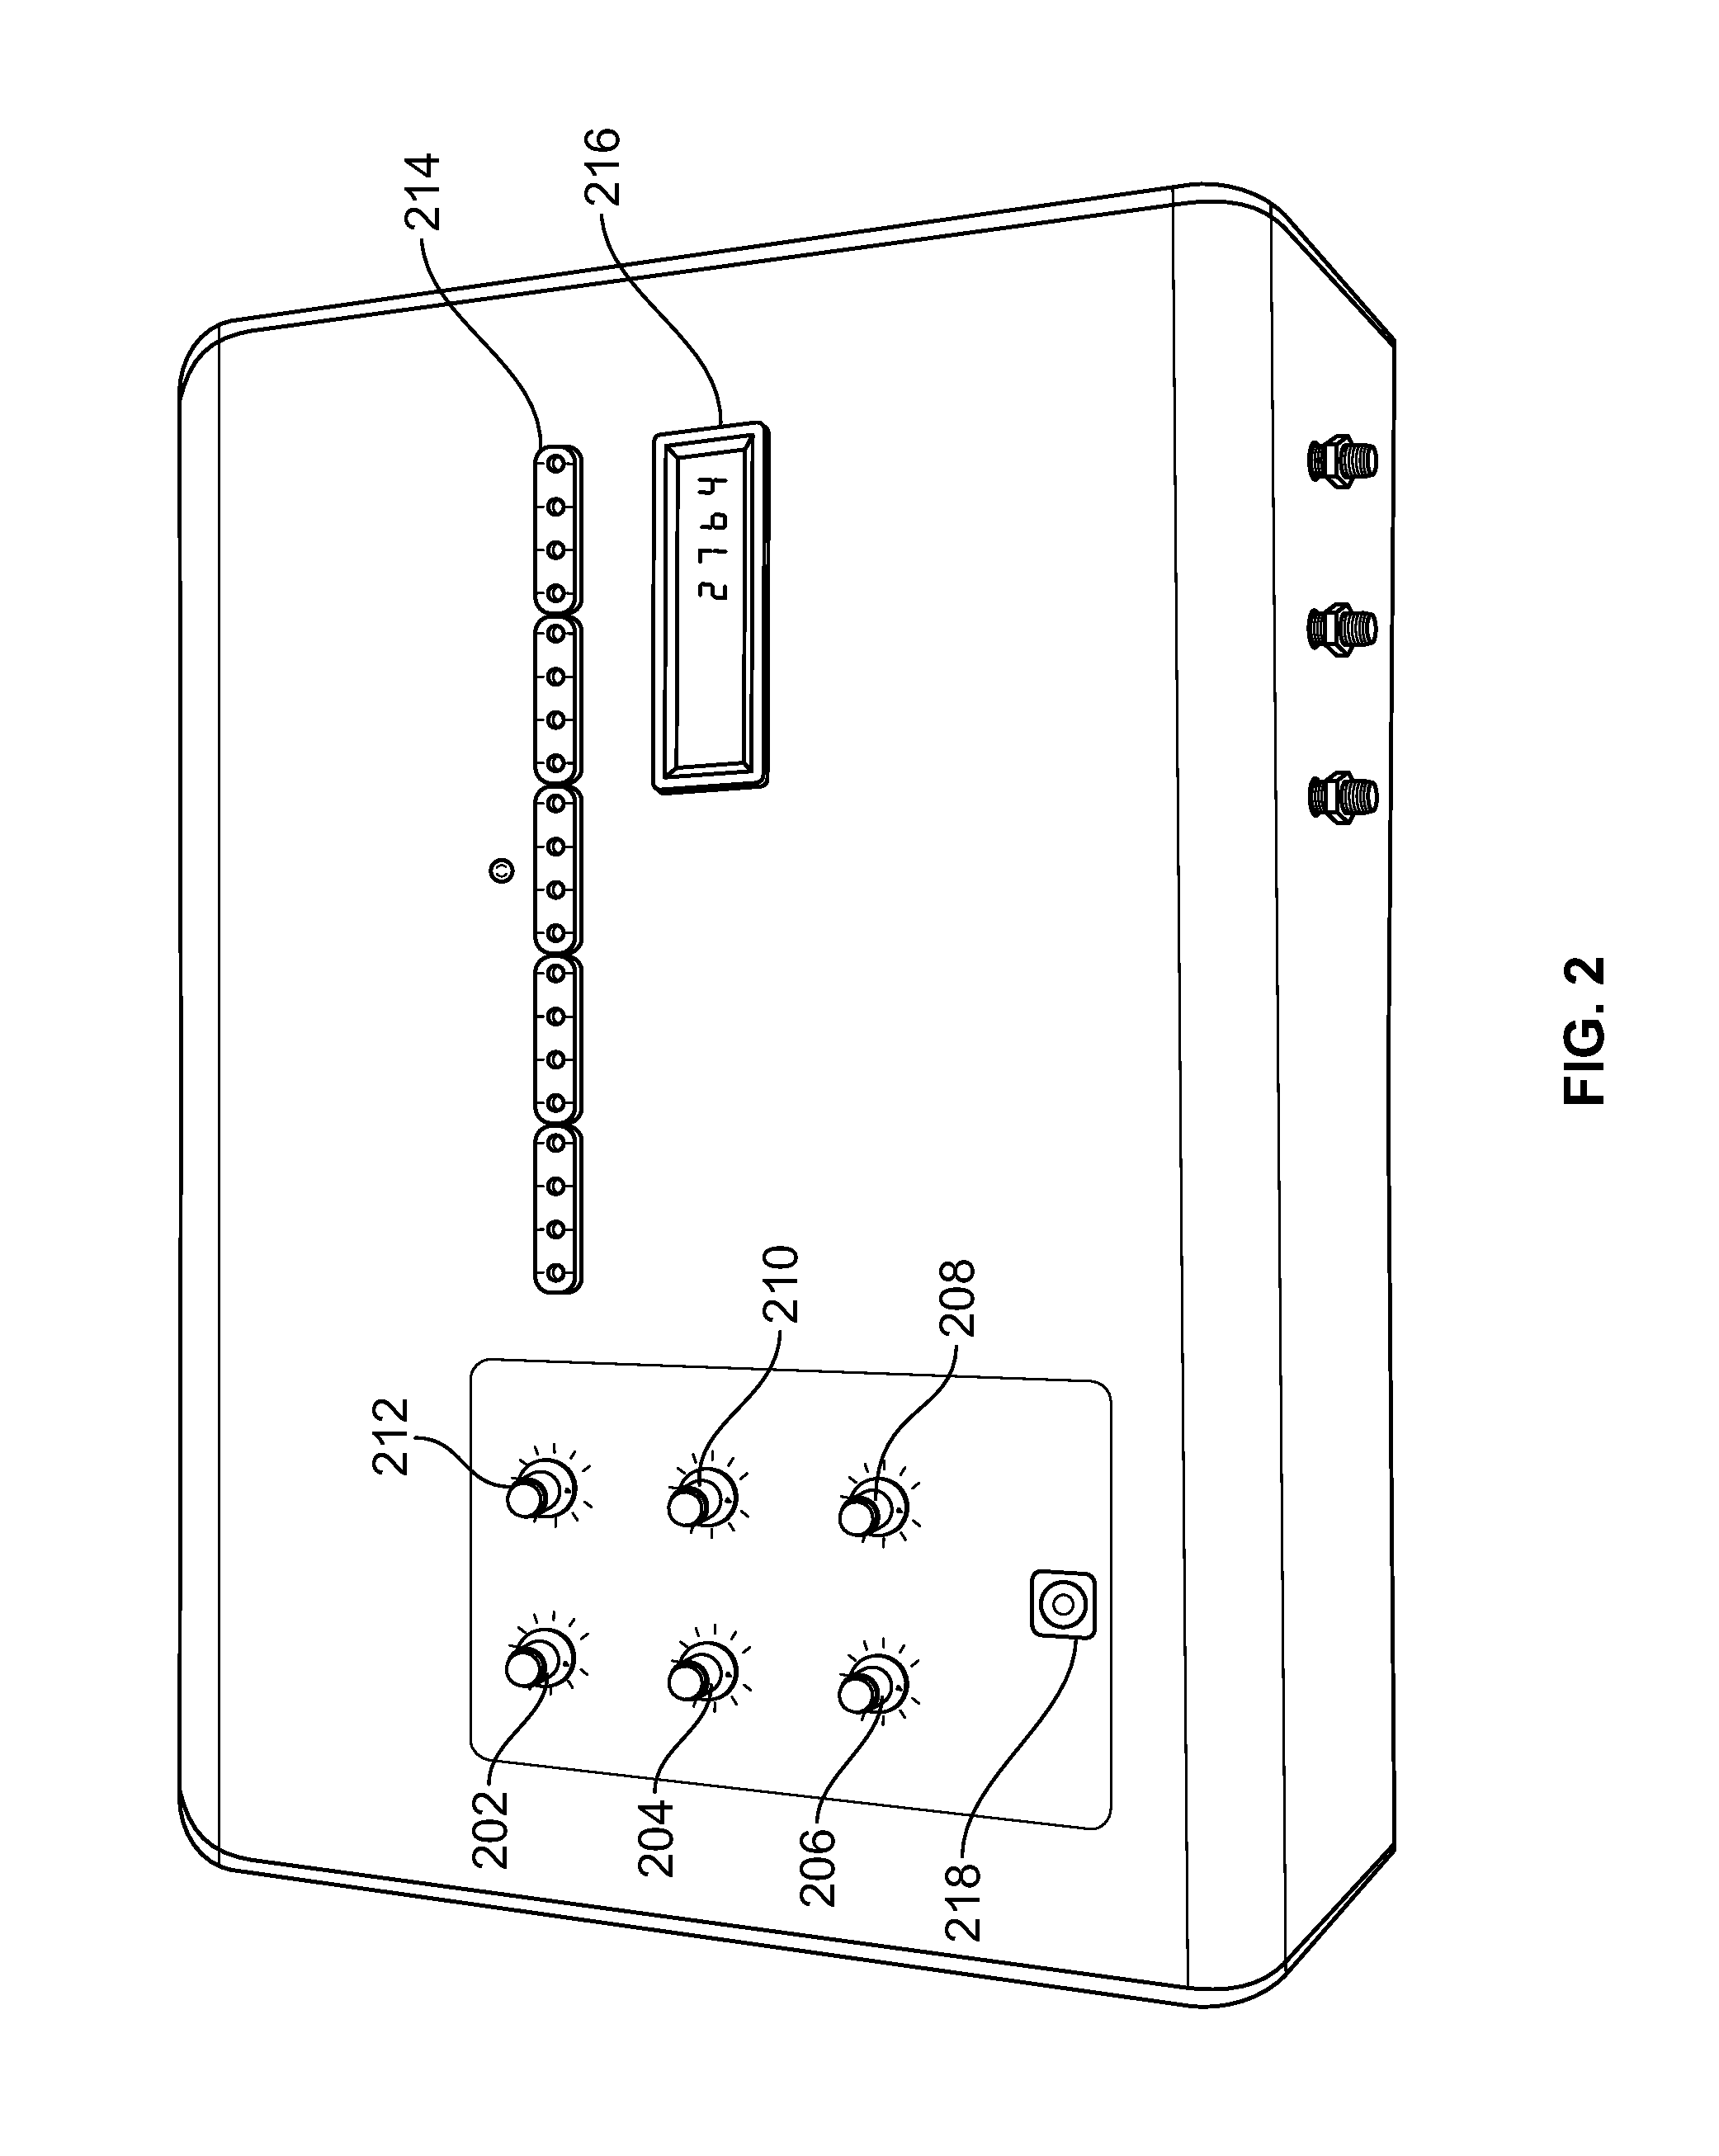 Spherical vibrating probe apparatus and method for conducting efficacy analysis of pain treatment using probe apparatus